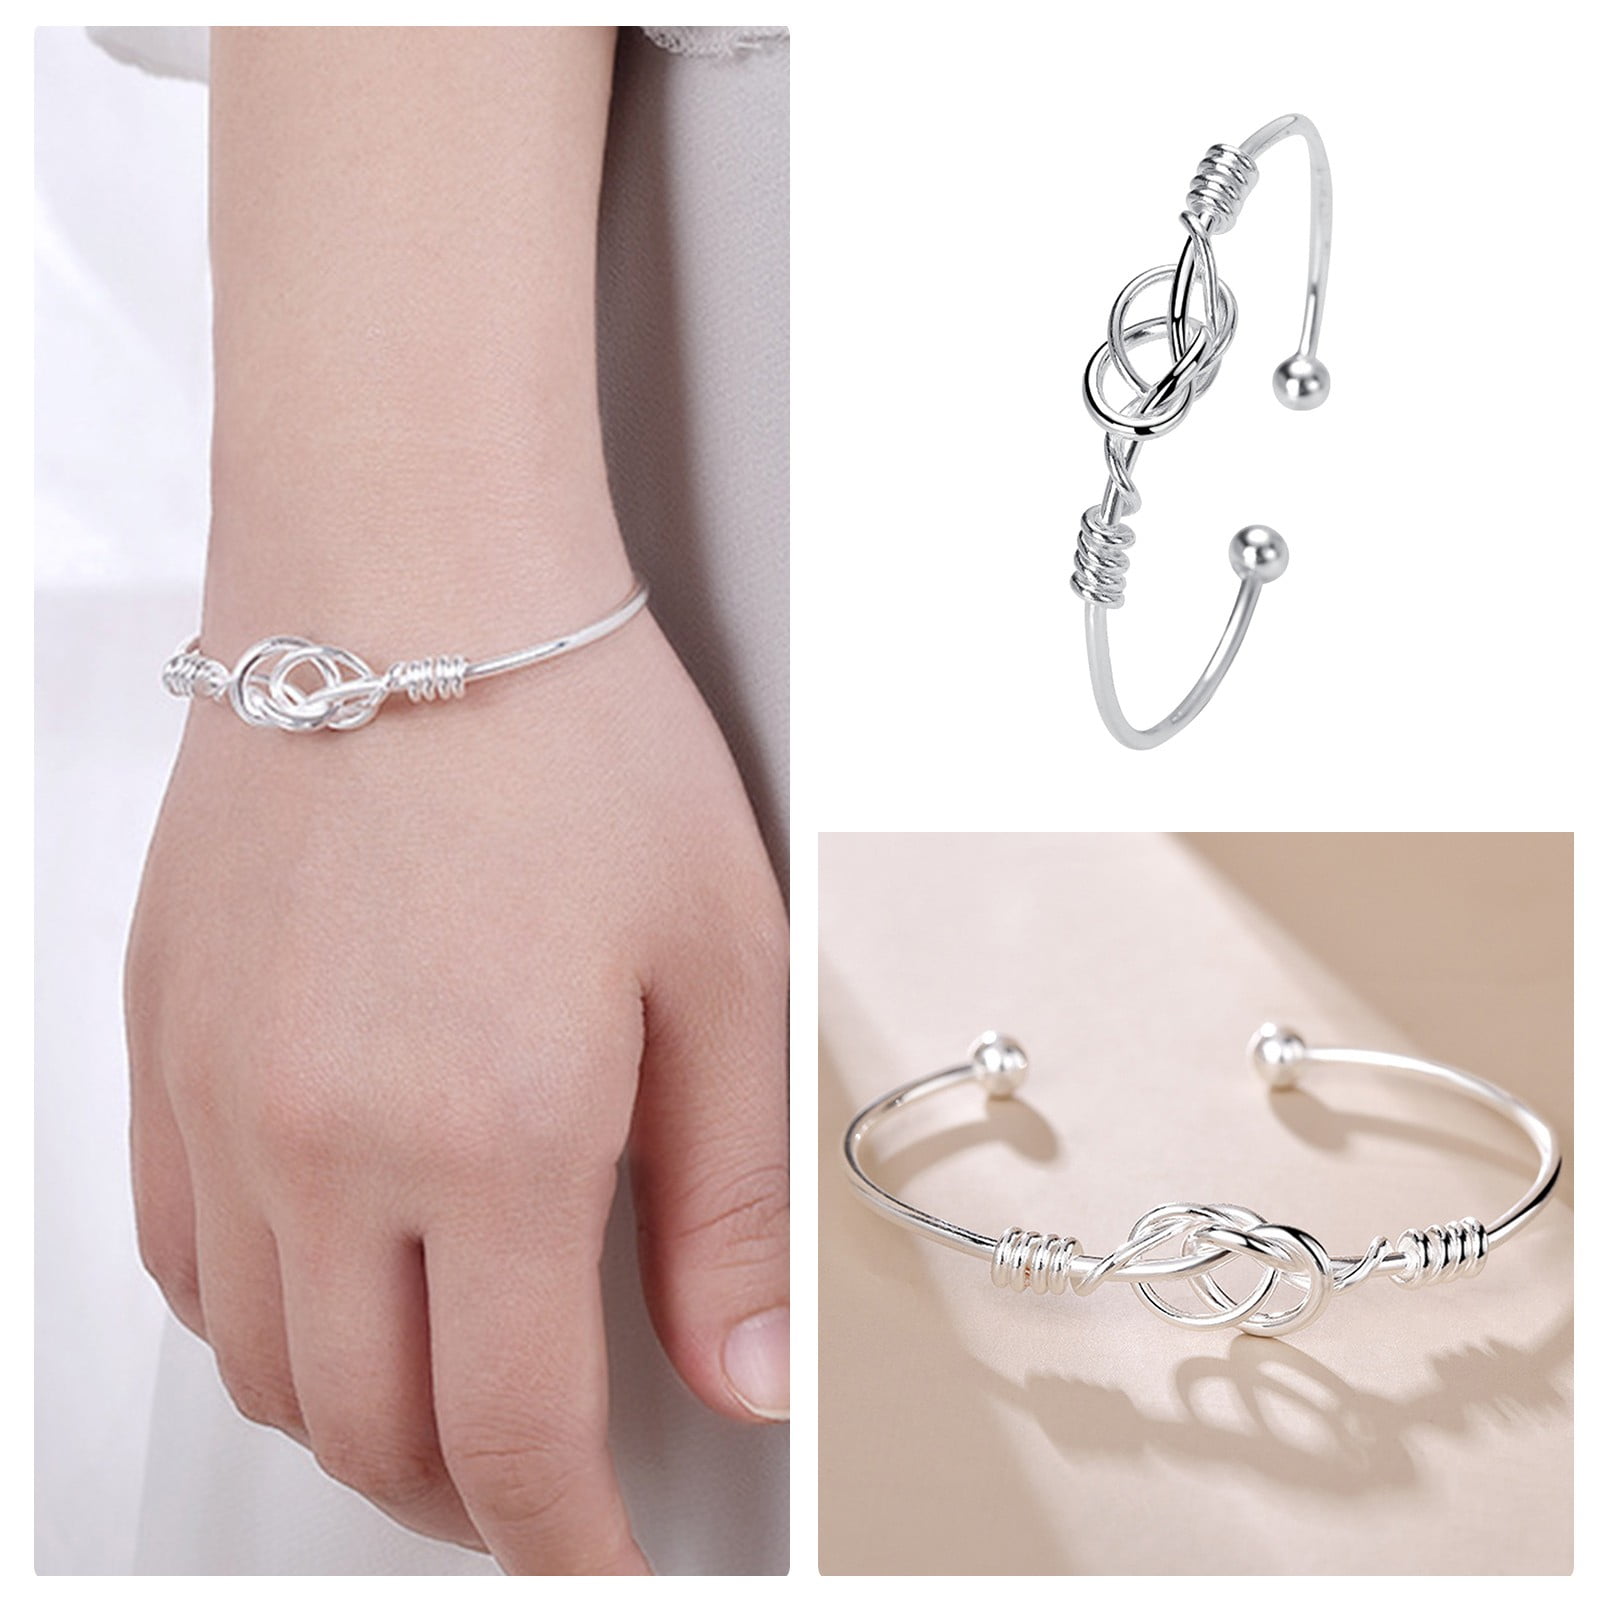 Buy Thrillz Adorable Silver Bracelet For Women Simulated Pearl 925 Sterling  Silver Bracelet For Women Girls Love Gifts Jewellery at Amazon.in